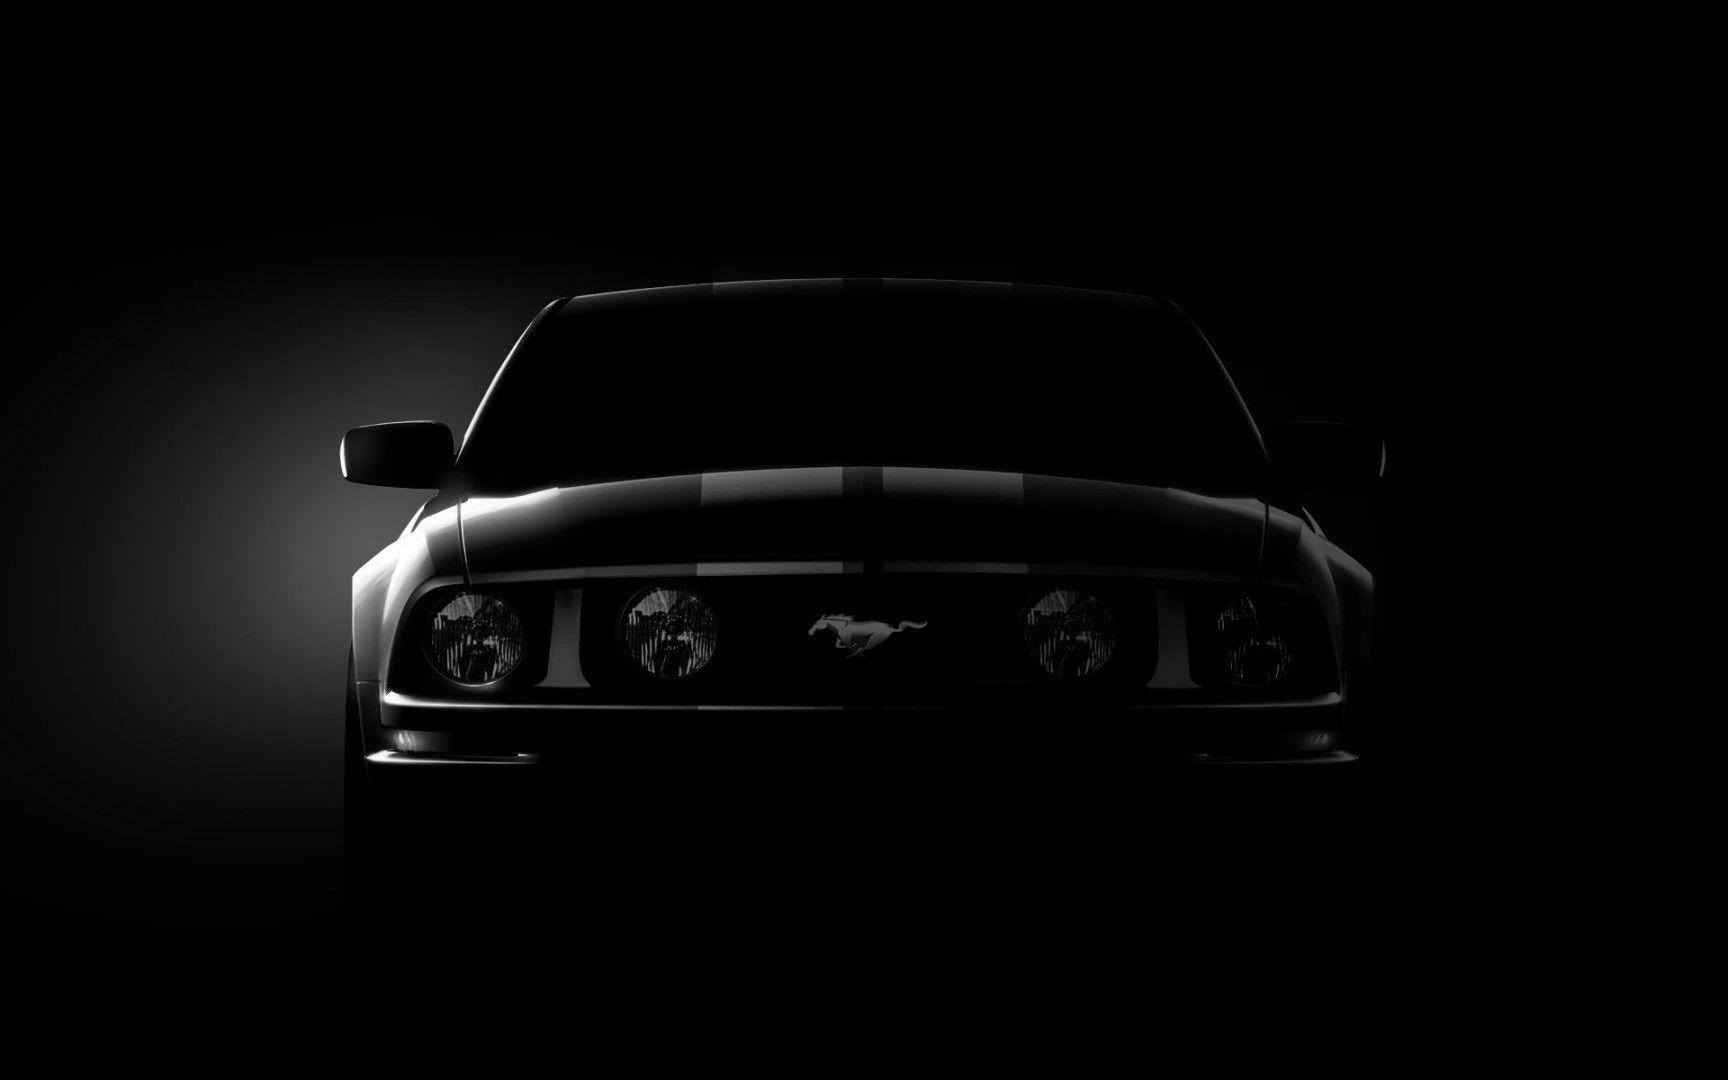 Ford Mustang Black Background Wallpaper. Muscle car